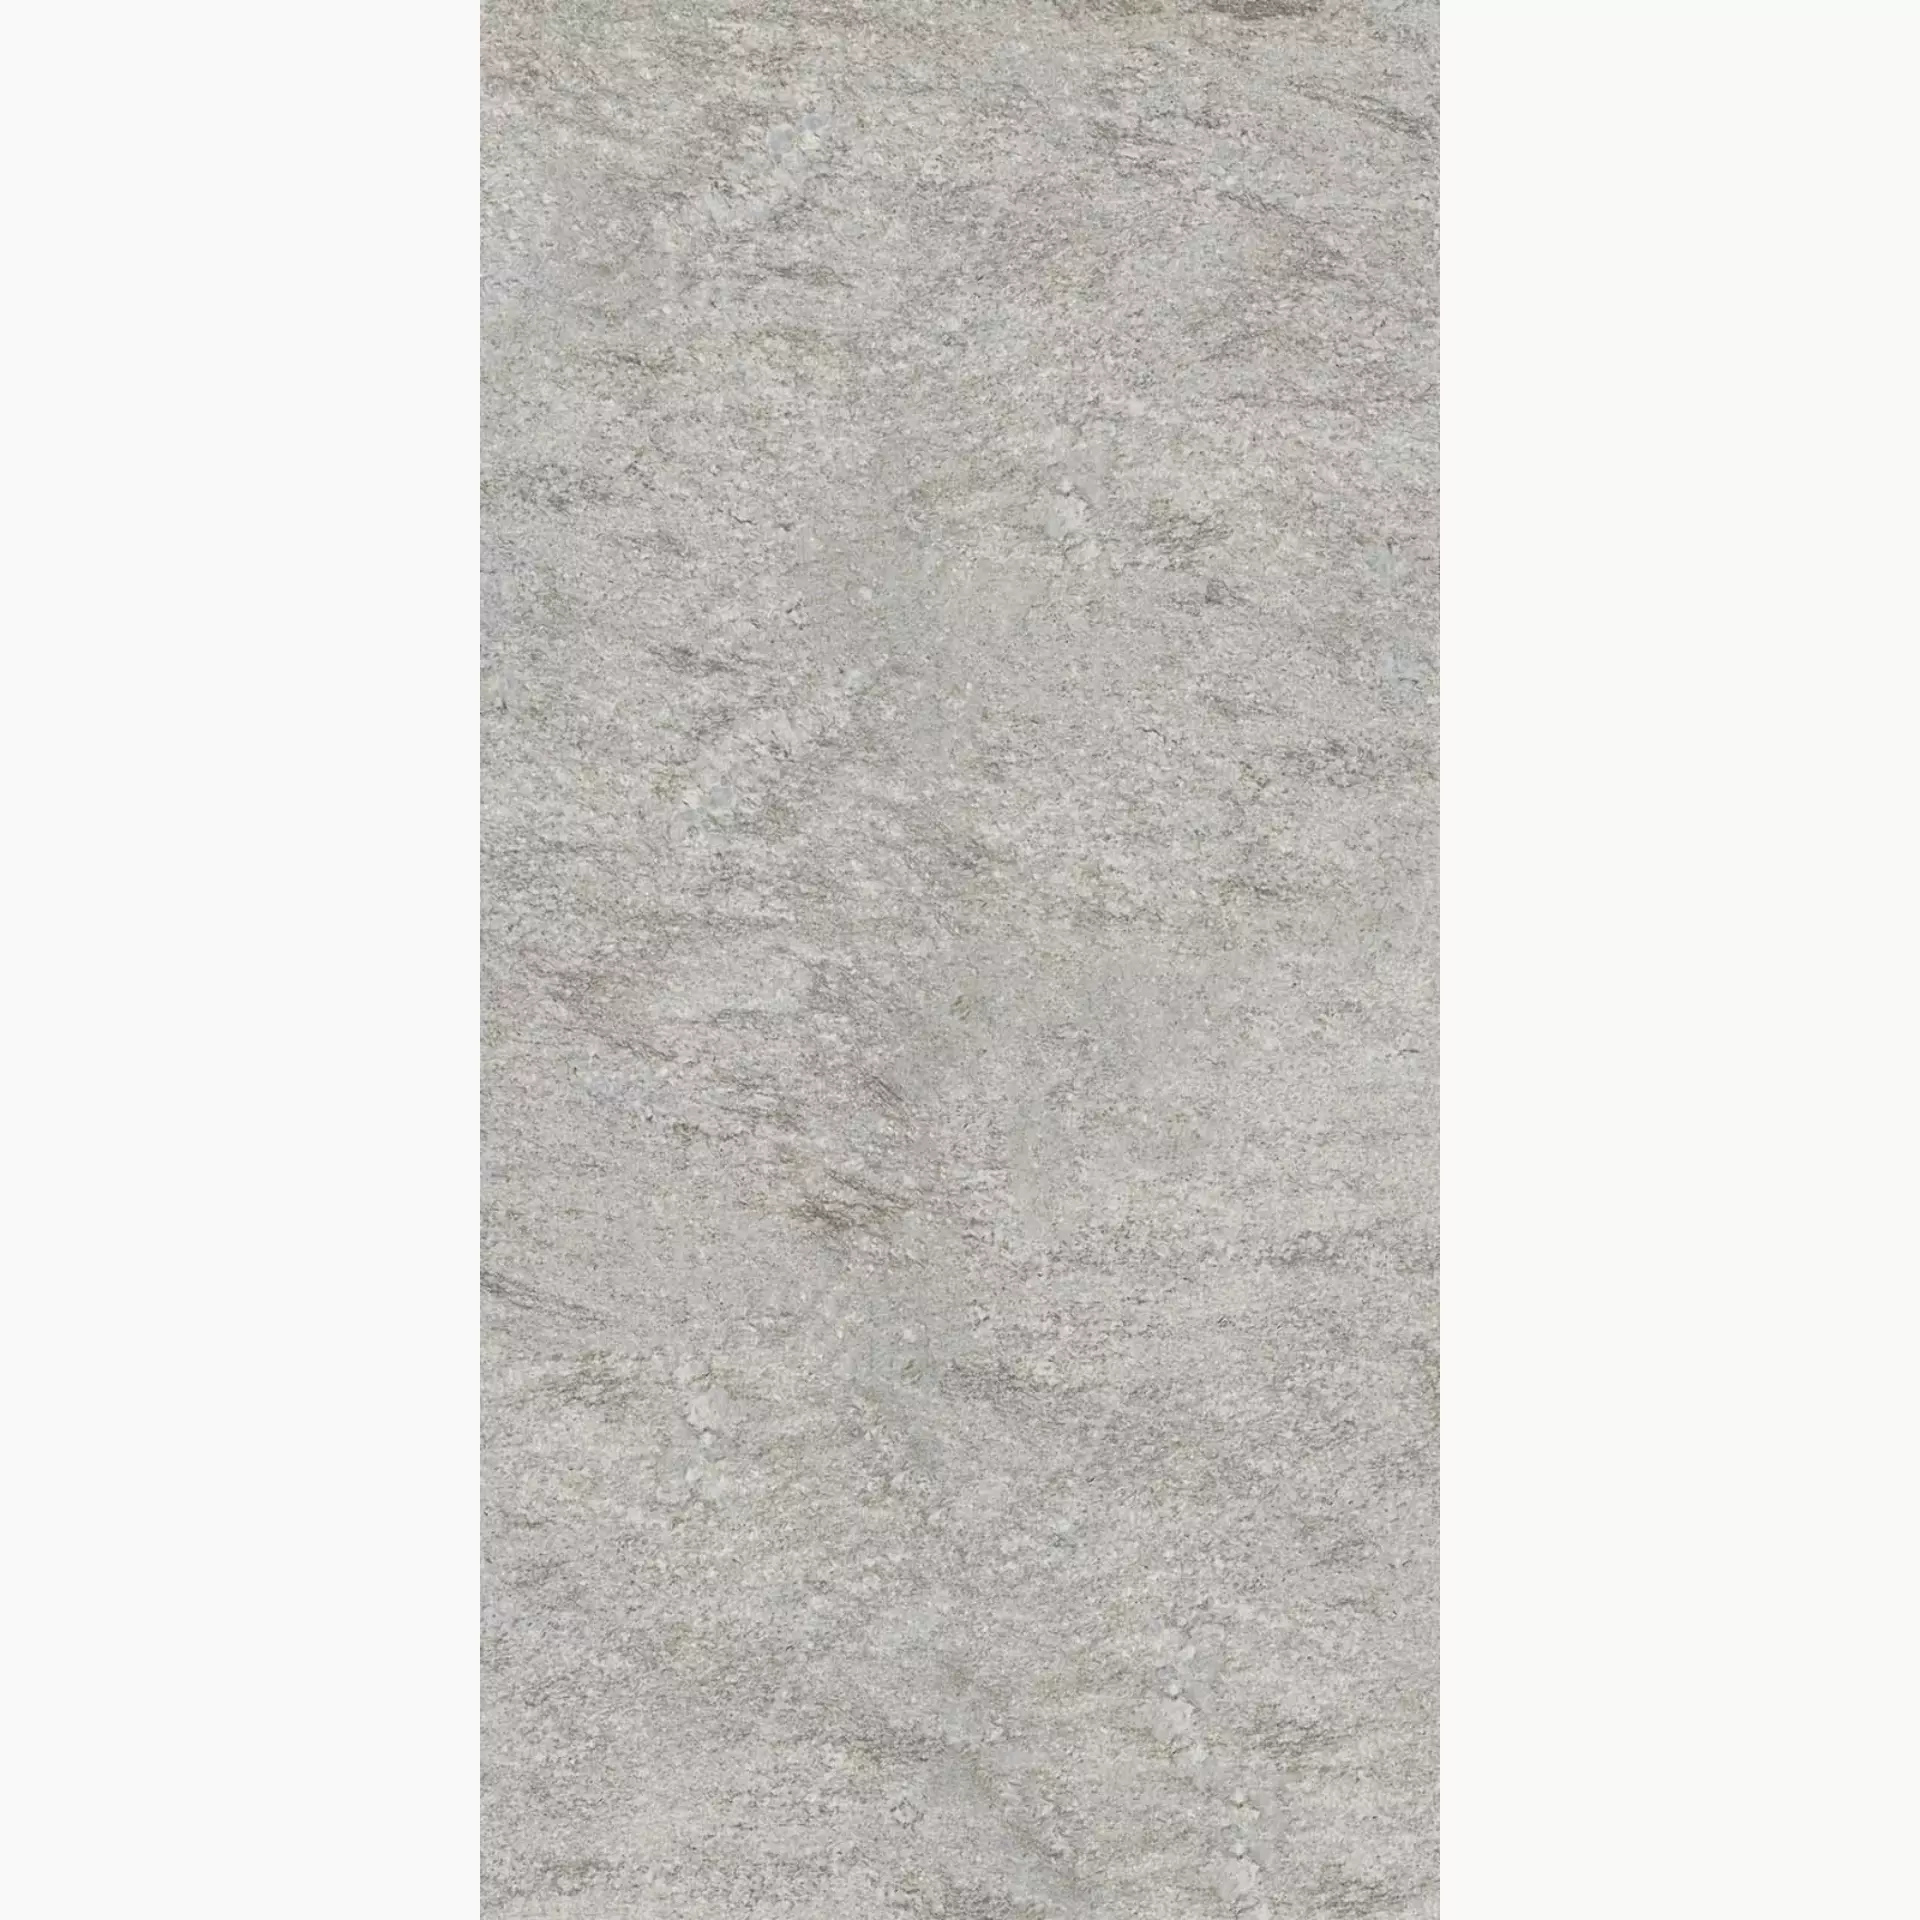 Keope Percorsi Frame Plima Silver Spazzolato 474A3144 60x120cm rectified 9mm